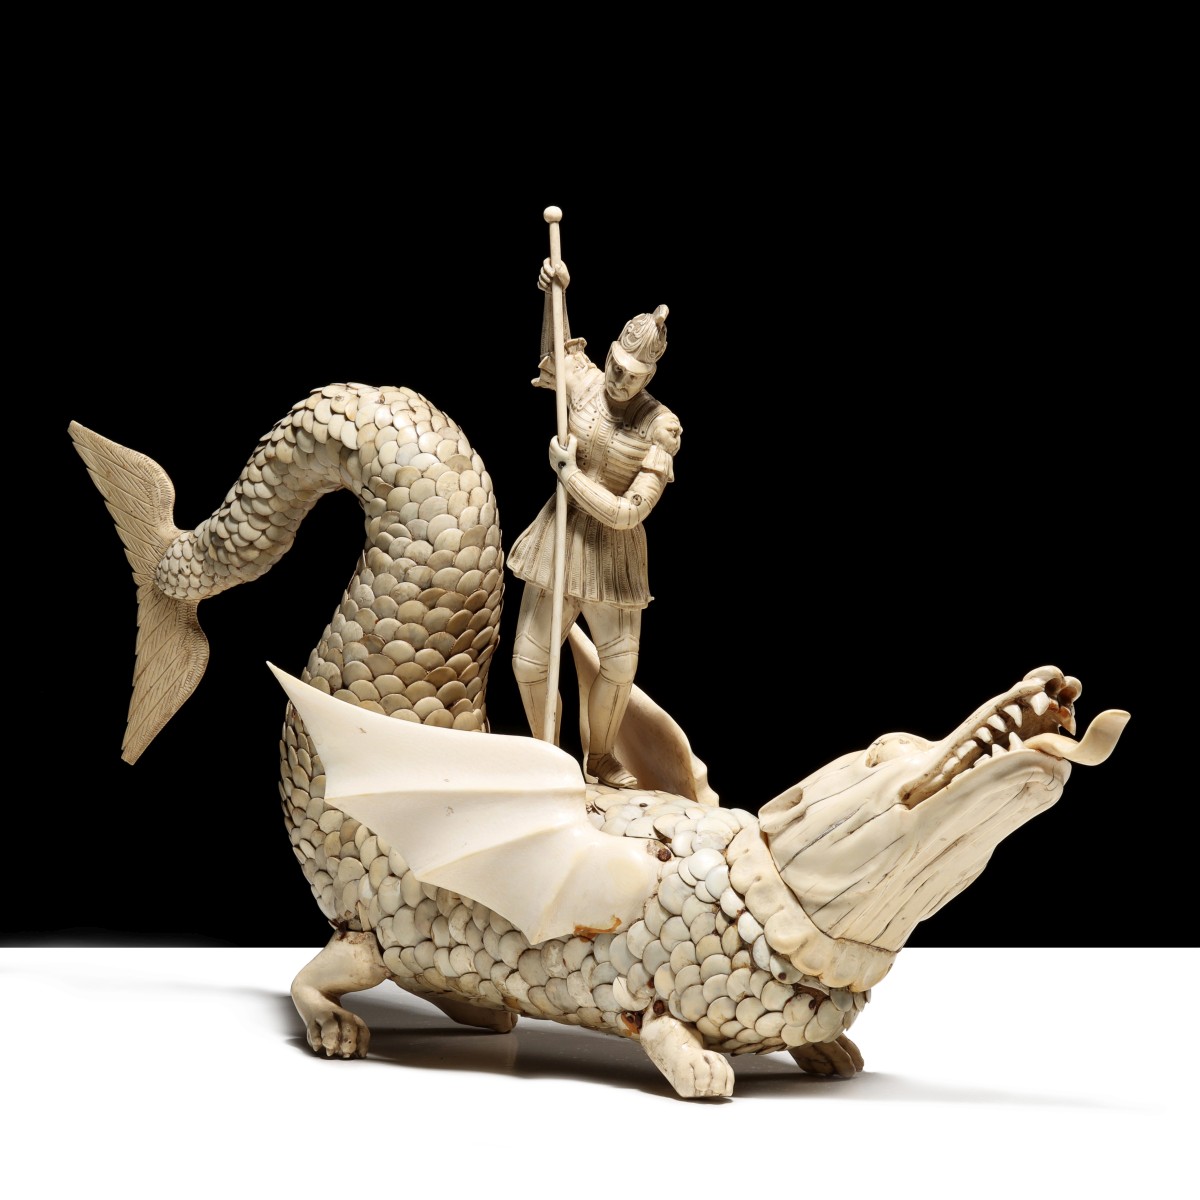 AN IMPORTANT 17TH C. IVORY ST. GEORGE AND THE DRAGON